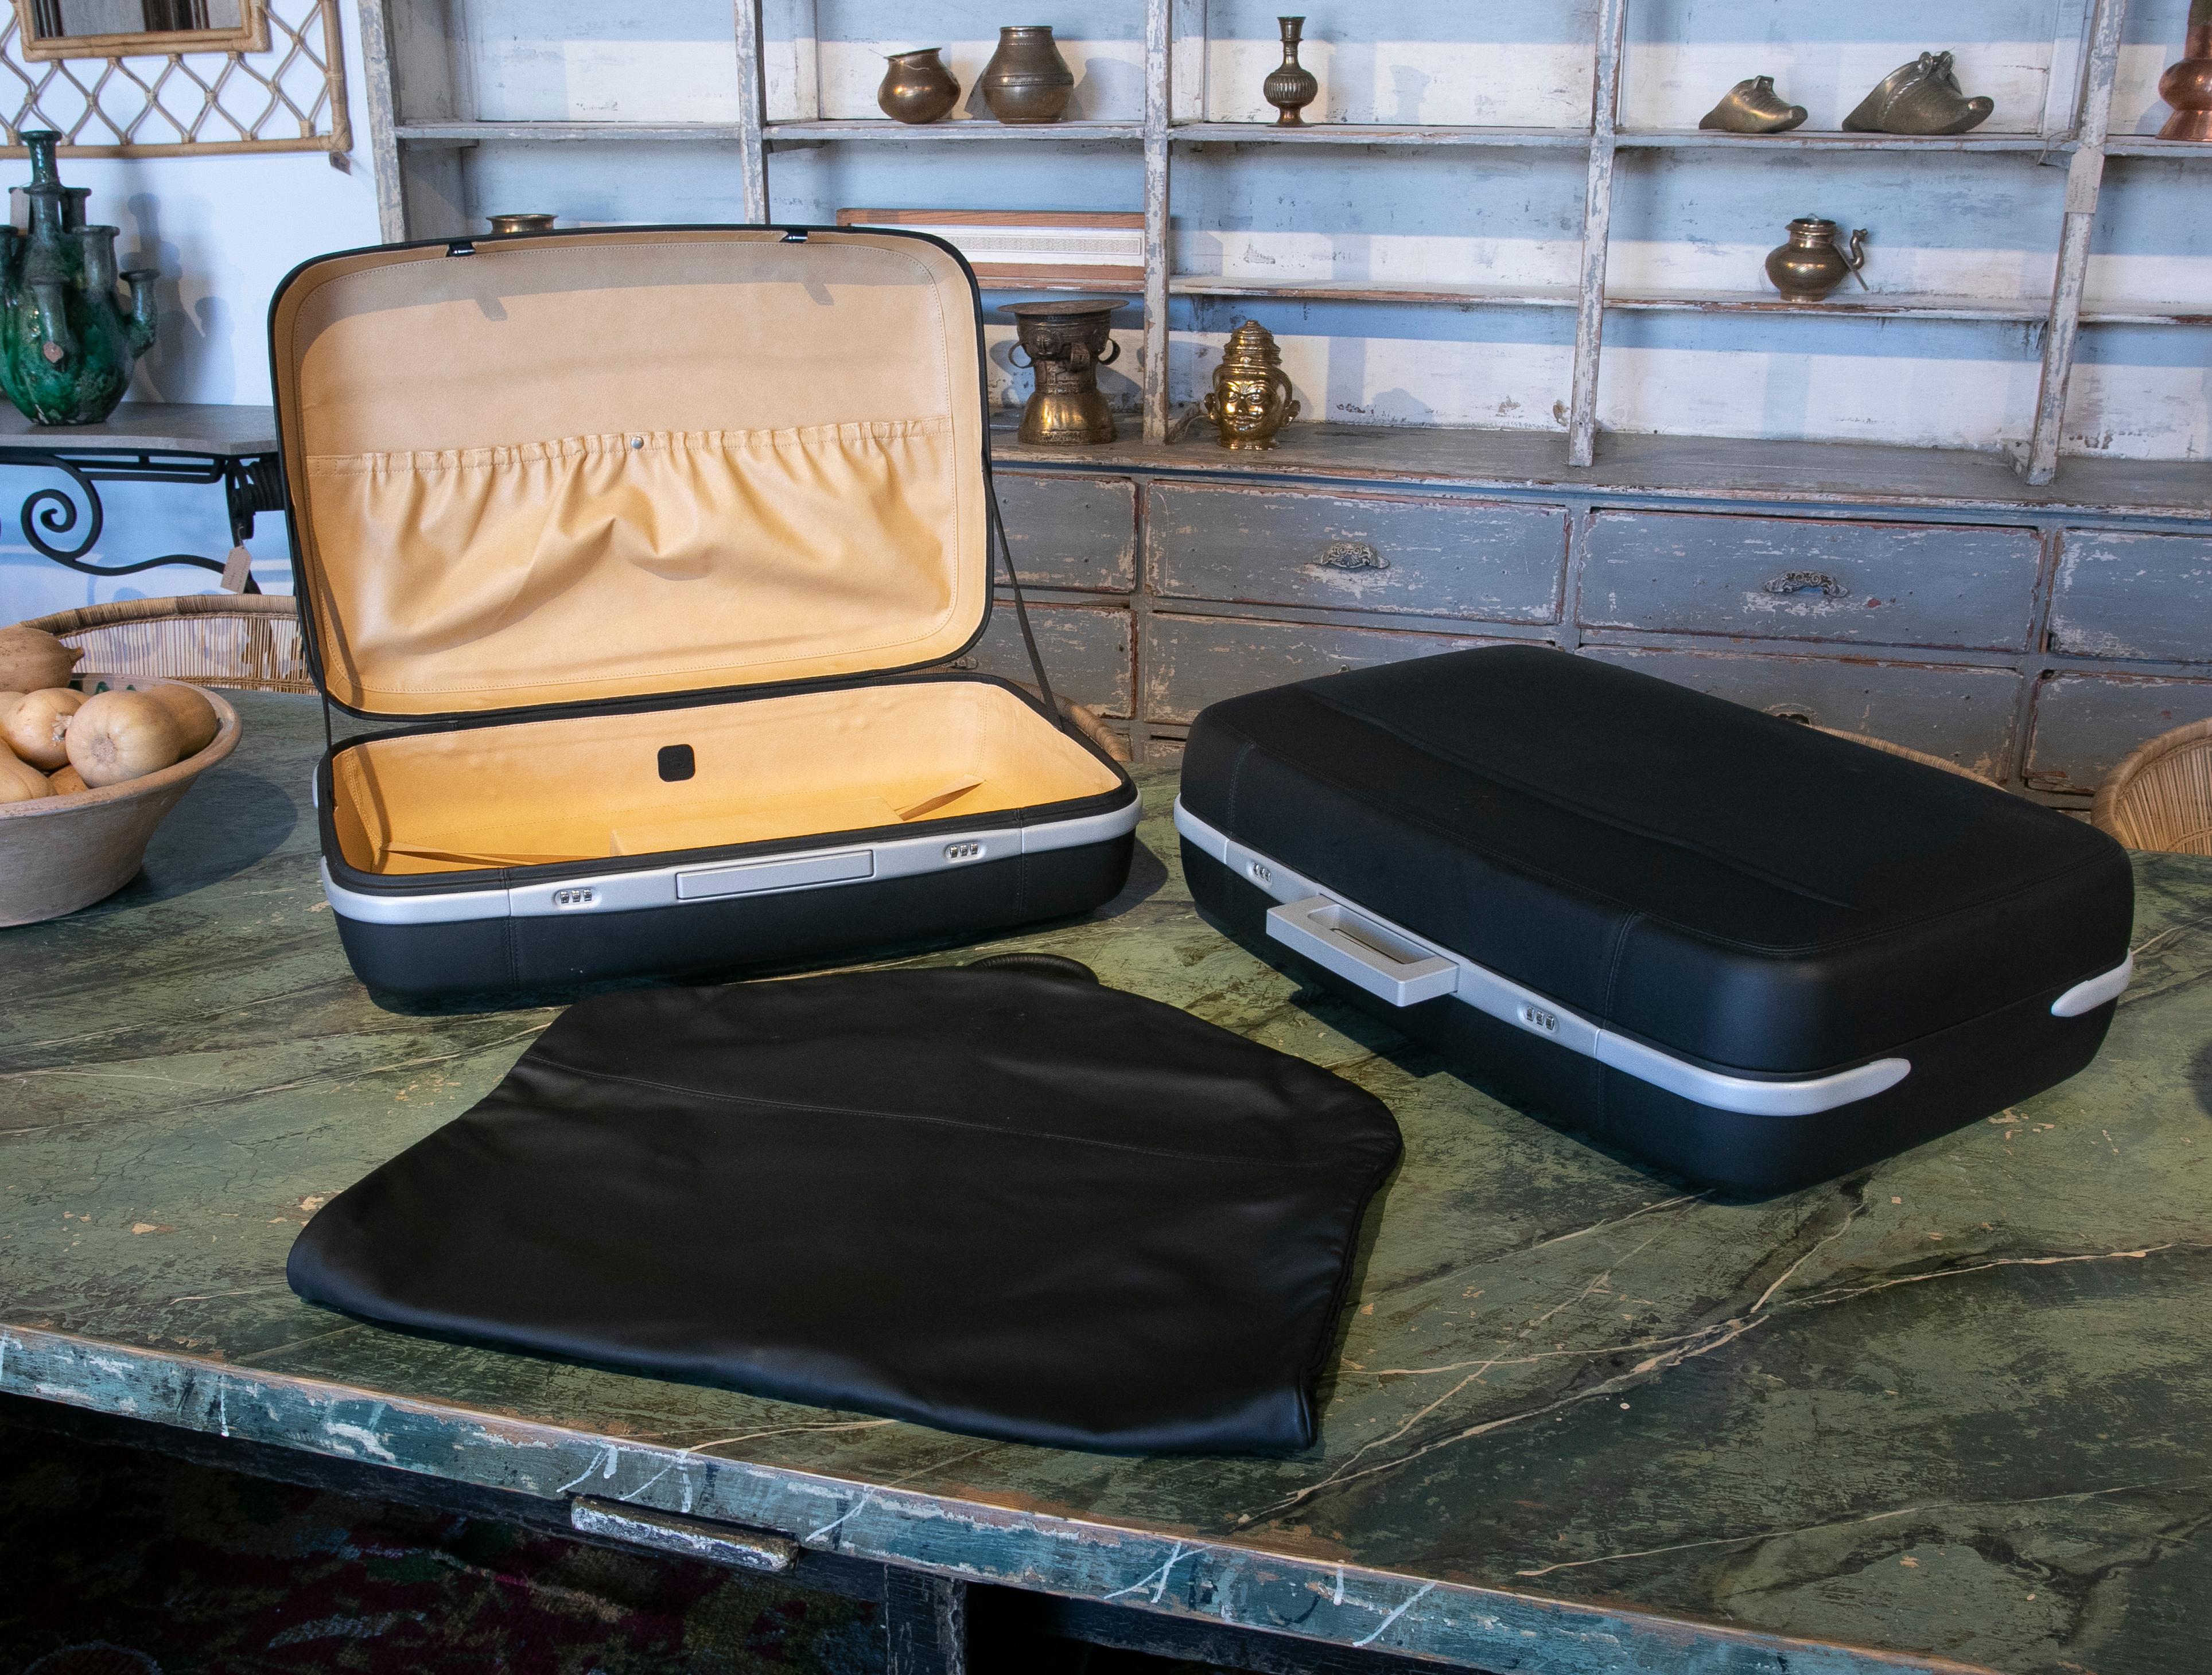 Ferrari suitcase set manufactured by Schedoni in black leather and aluminum
Brand New with Original Cases.